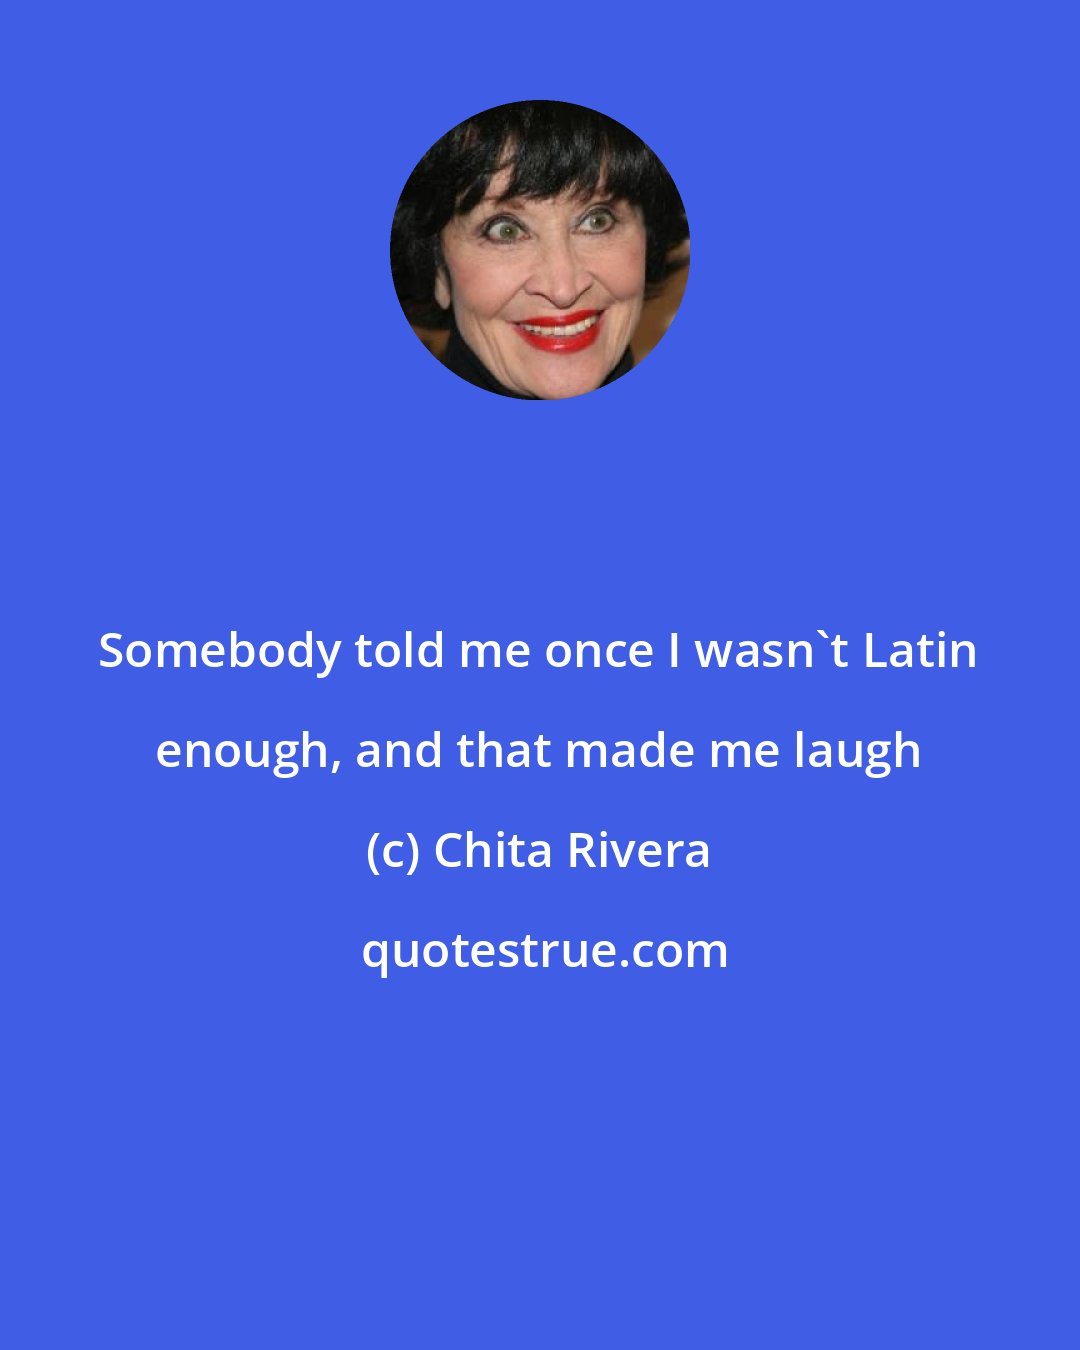 Chita Rivera: Somebody told me once I wasn't Latin enough, and that made me laugh